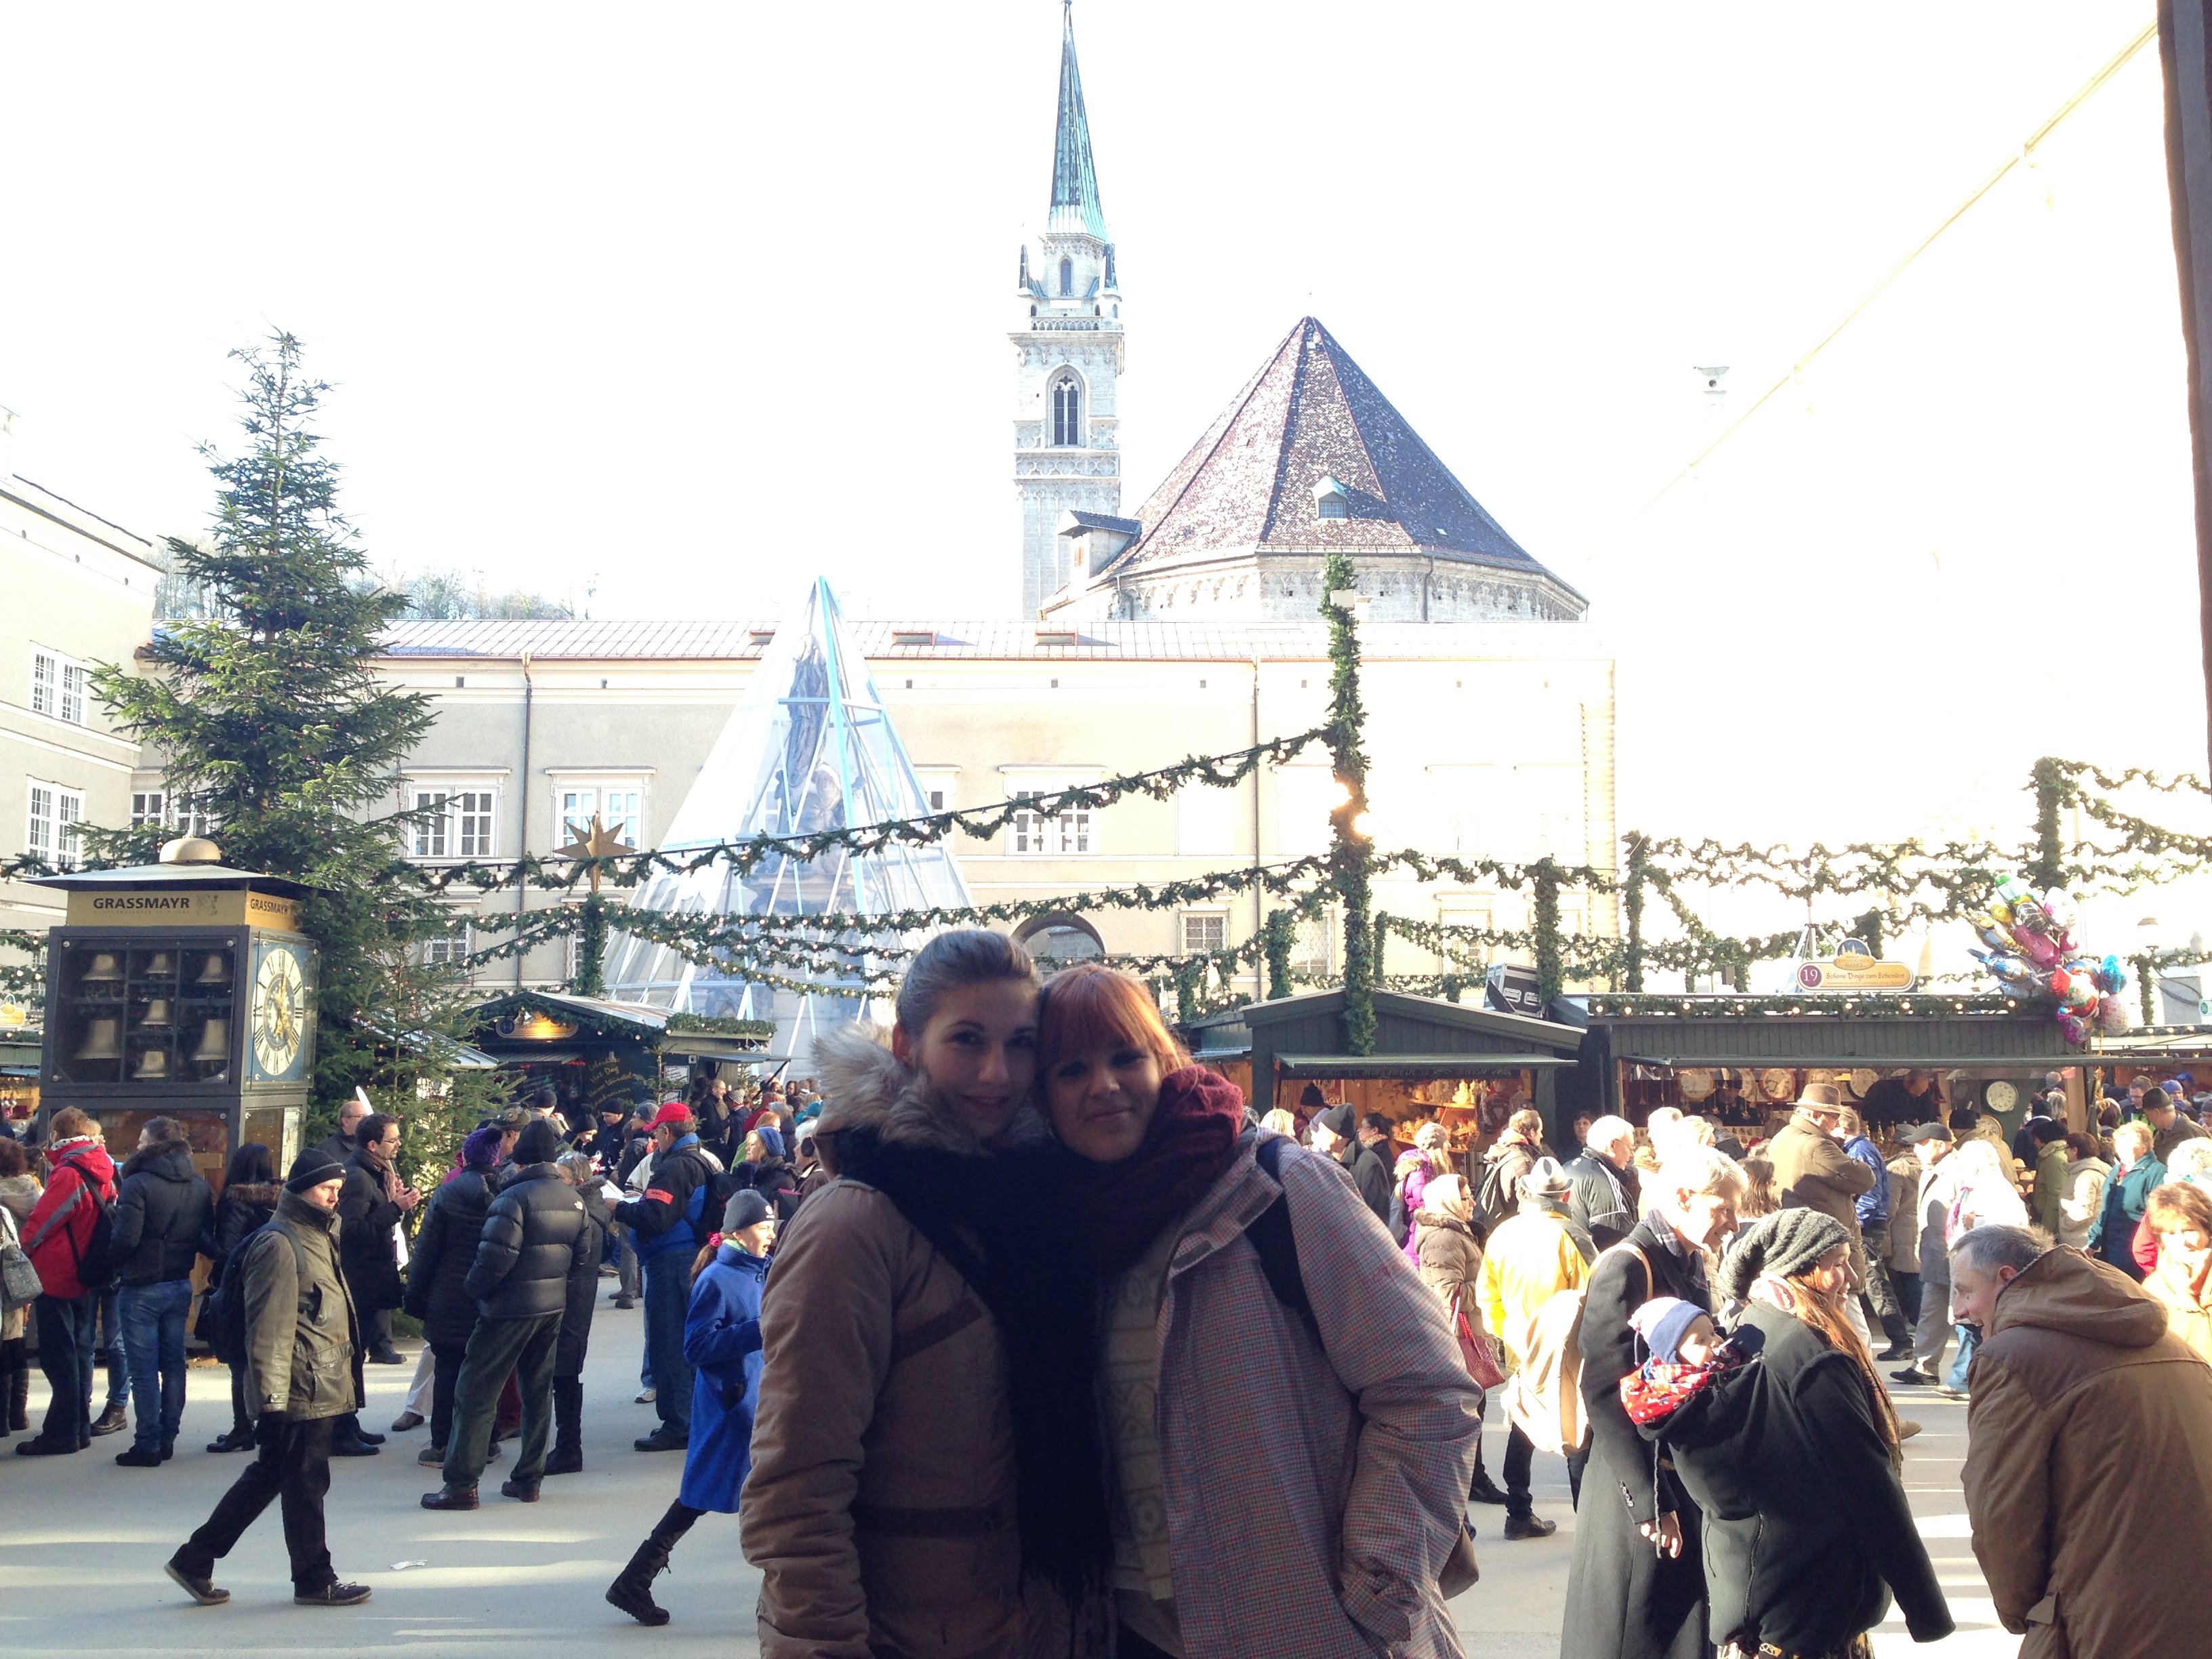 In the Christmas market